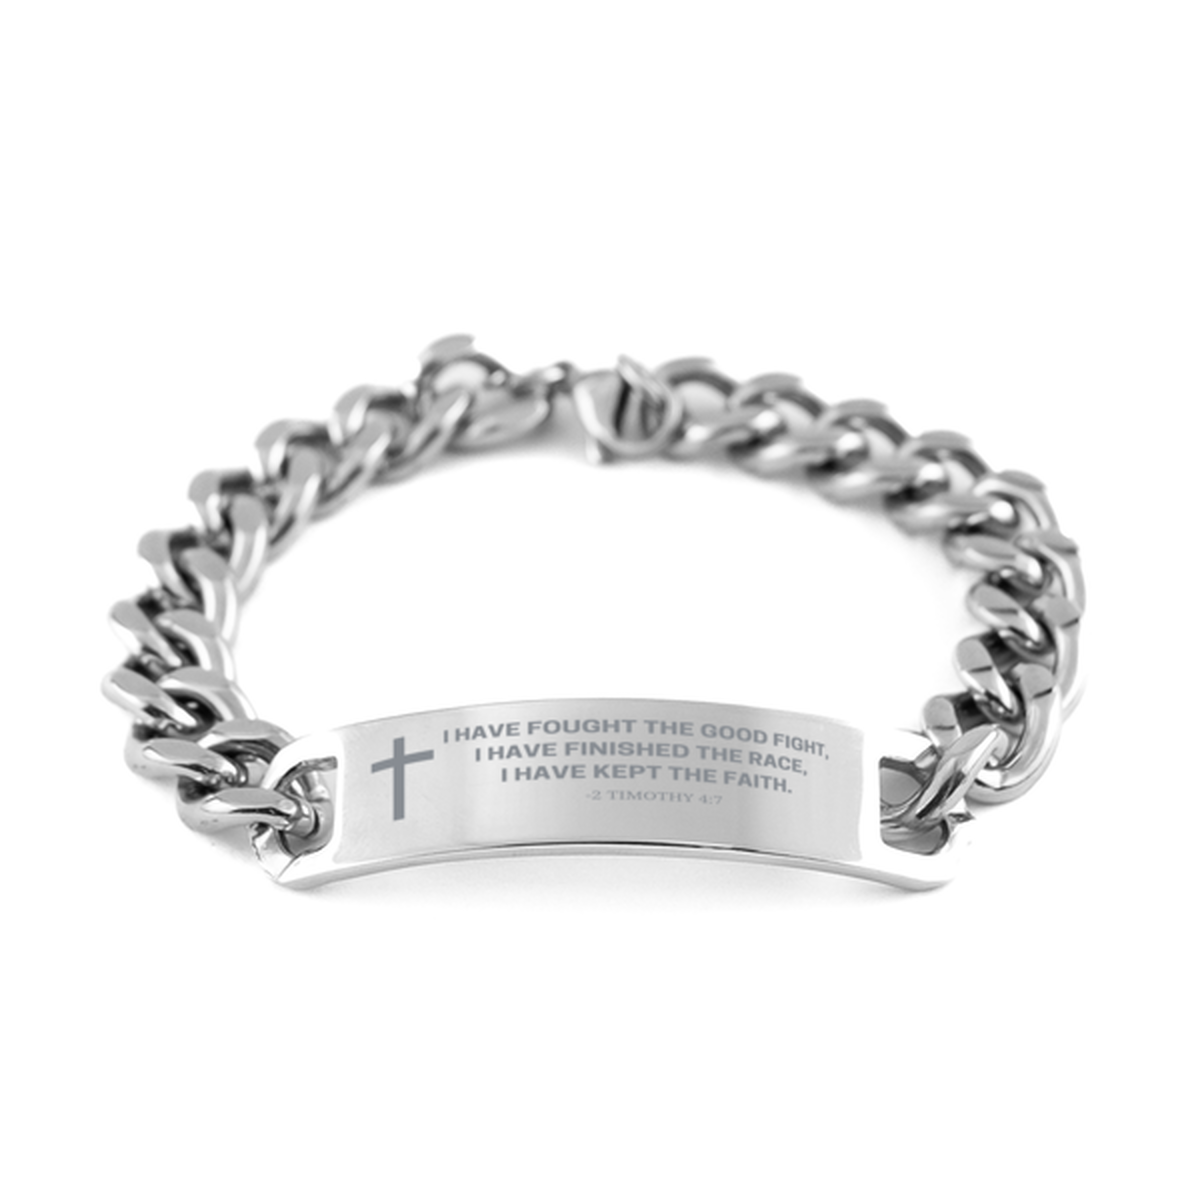 Baptism Gifts For Teenage Boys Girls, Christian Bible Verse Cuban Chain Bracelet, I have fought the good fight, Catholic Confirmation Gifts for Son, Godson, Grandson, Nephew